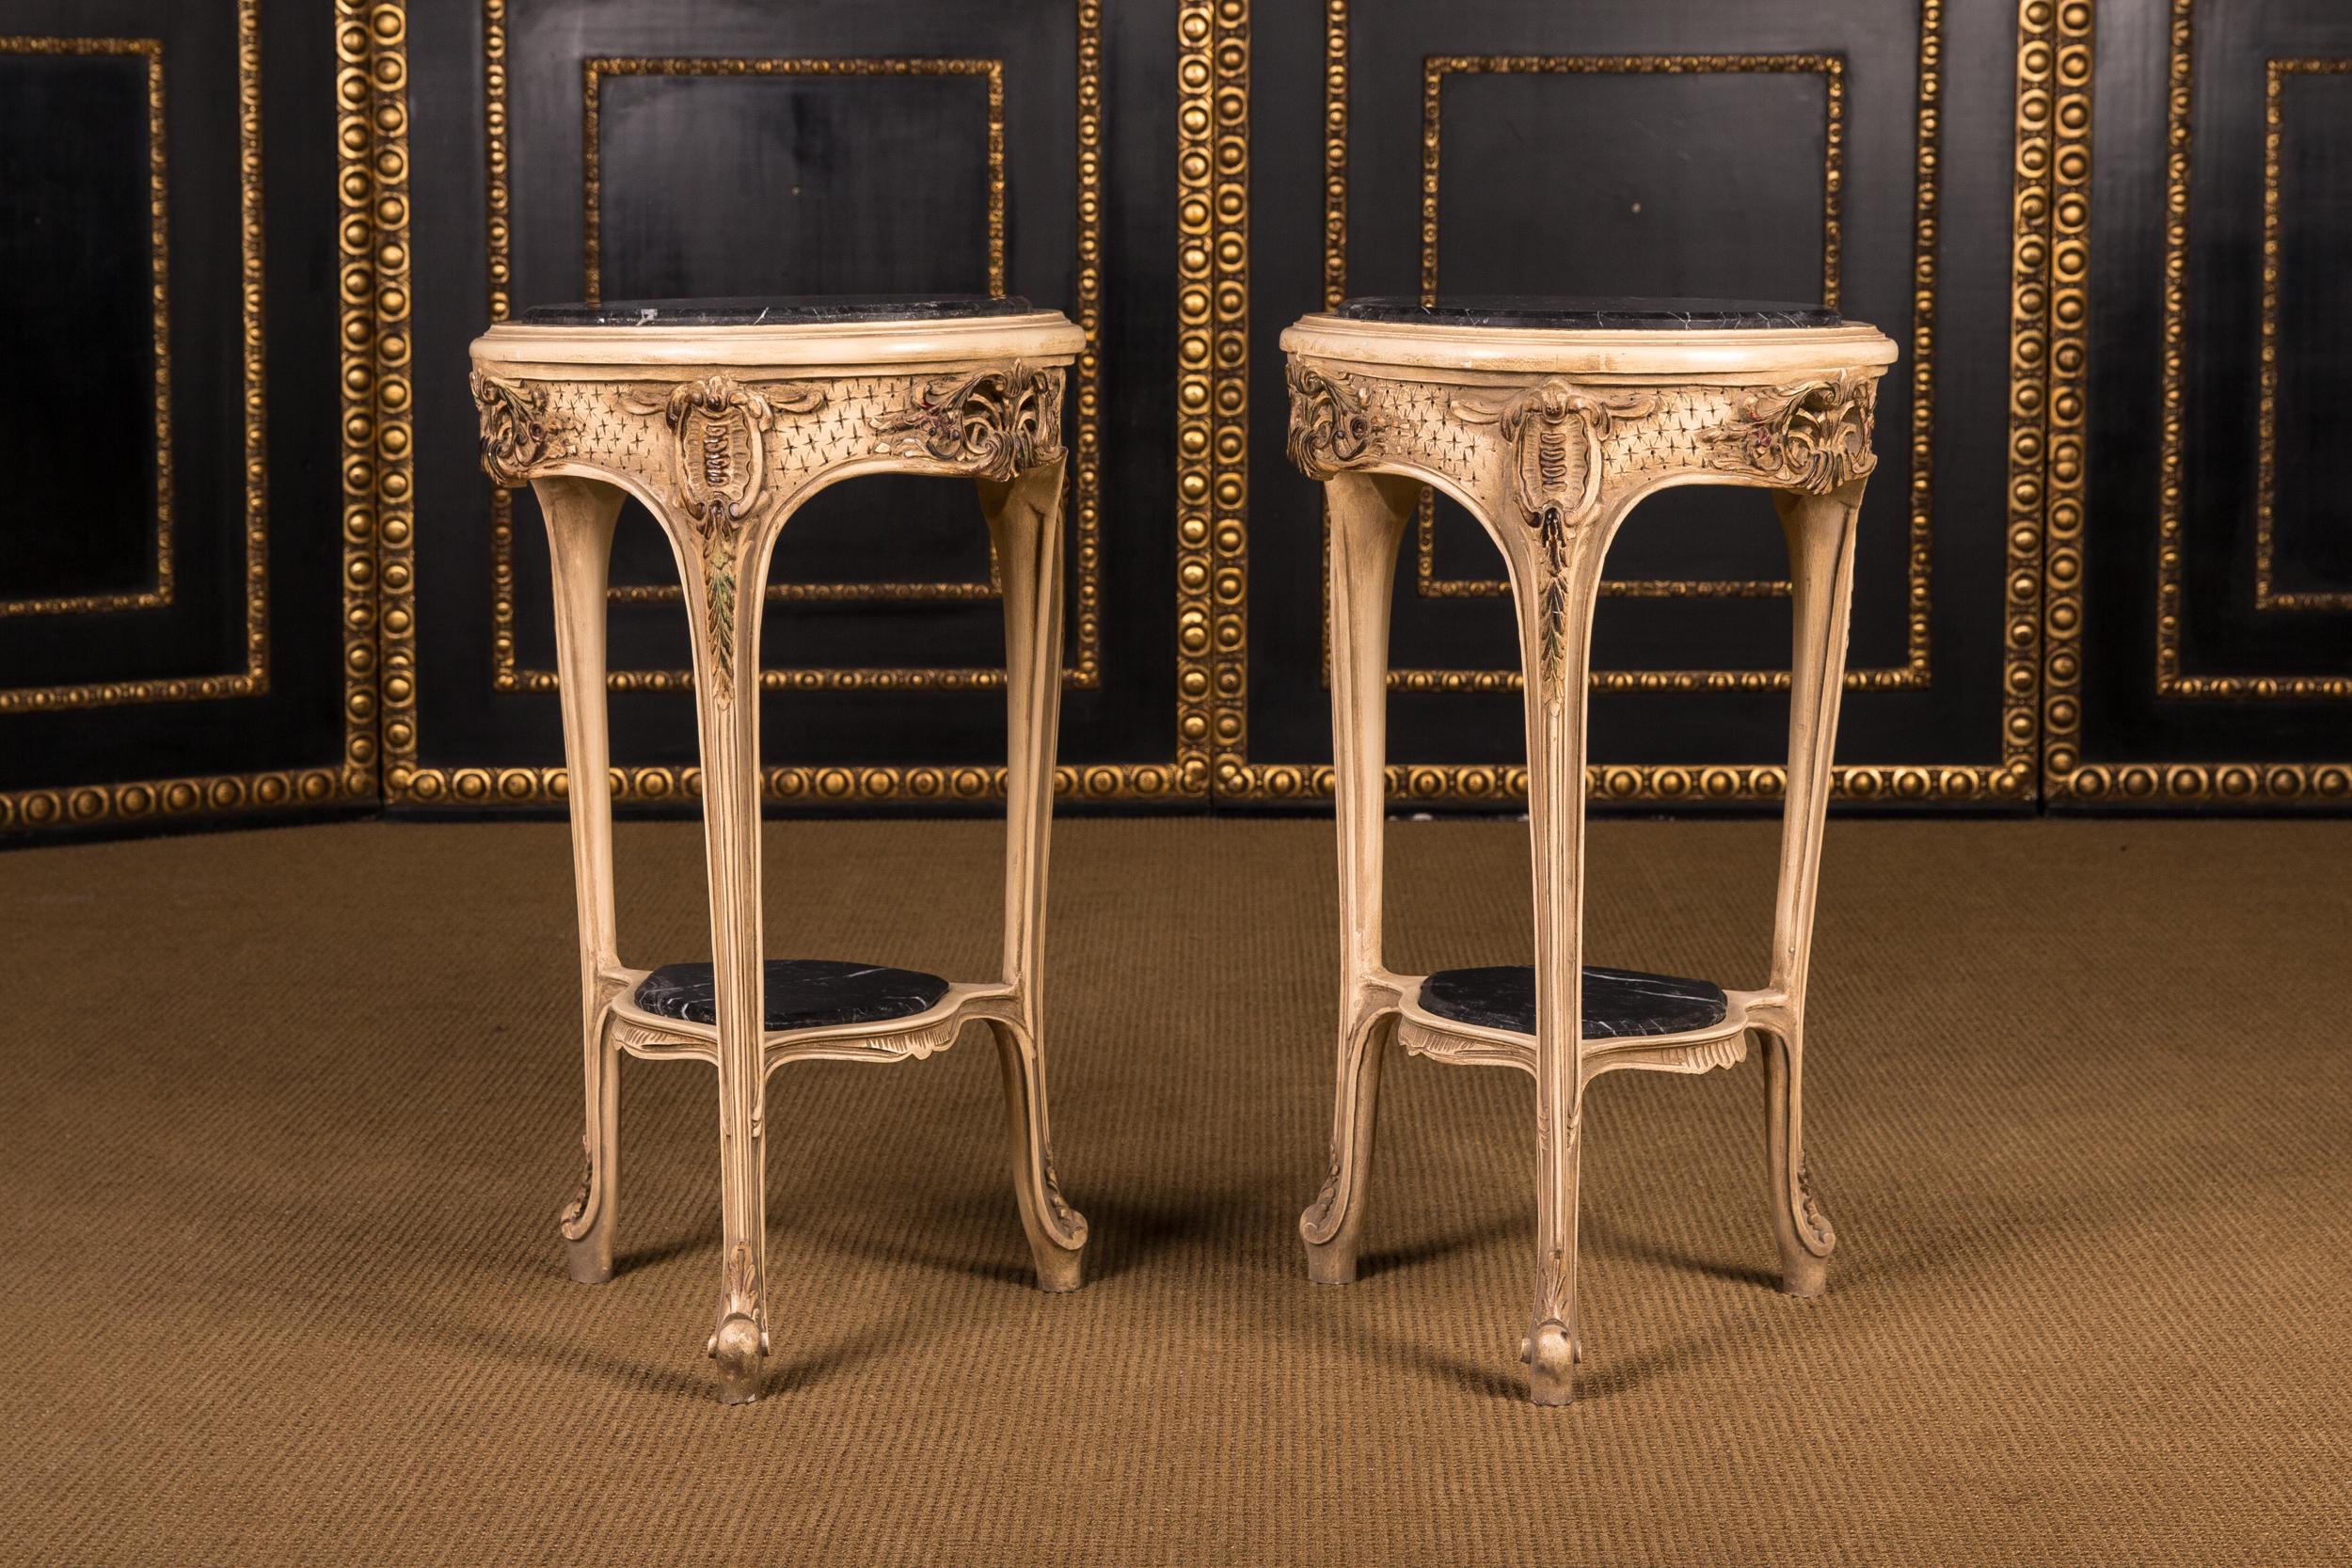 High quality solid beech wood finely carved down to the last detail. Colored and gilt gilded. Cambered, all-round ornamental relief base with carved foliage and openwork rocaille on curly legs. Below connected by a curly tray embedded in wickerwork.